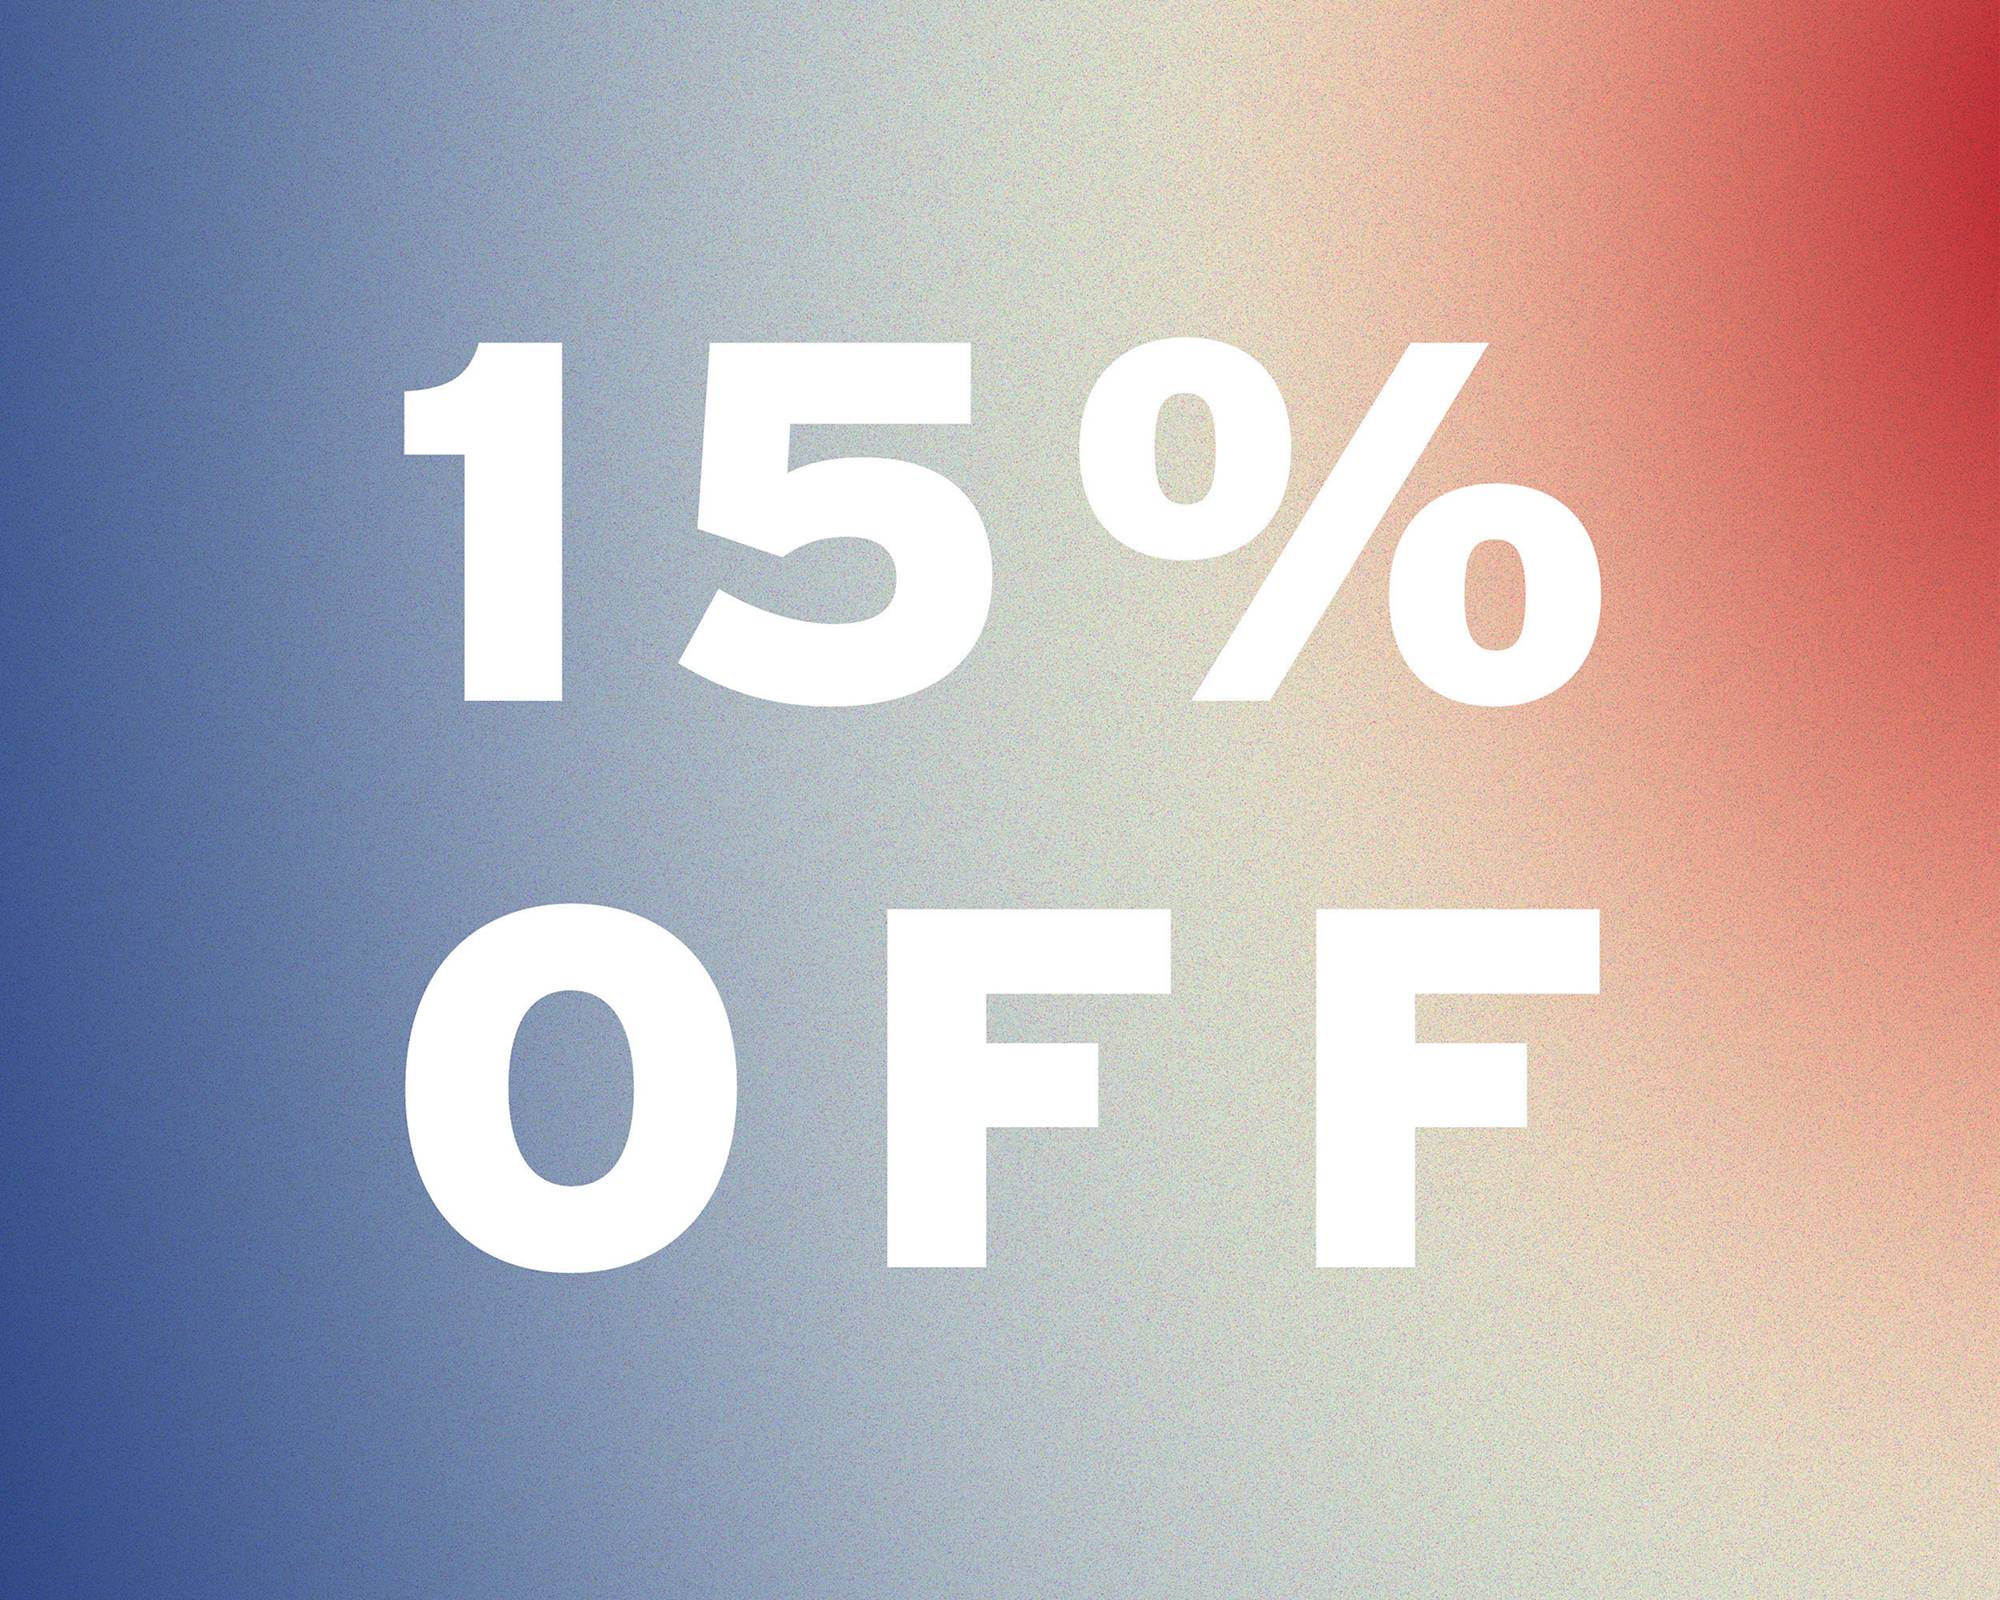 Red, white and blue gradient texture plate with white "15% OFF" text treatment on top